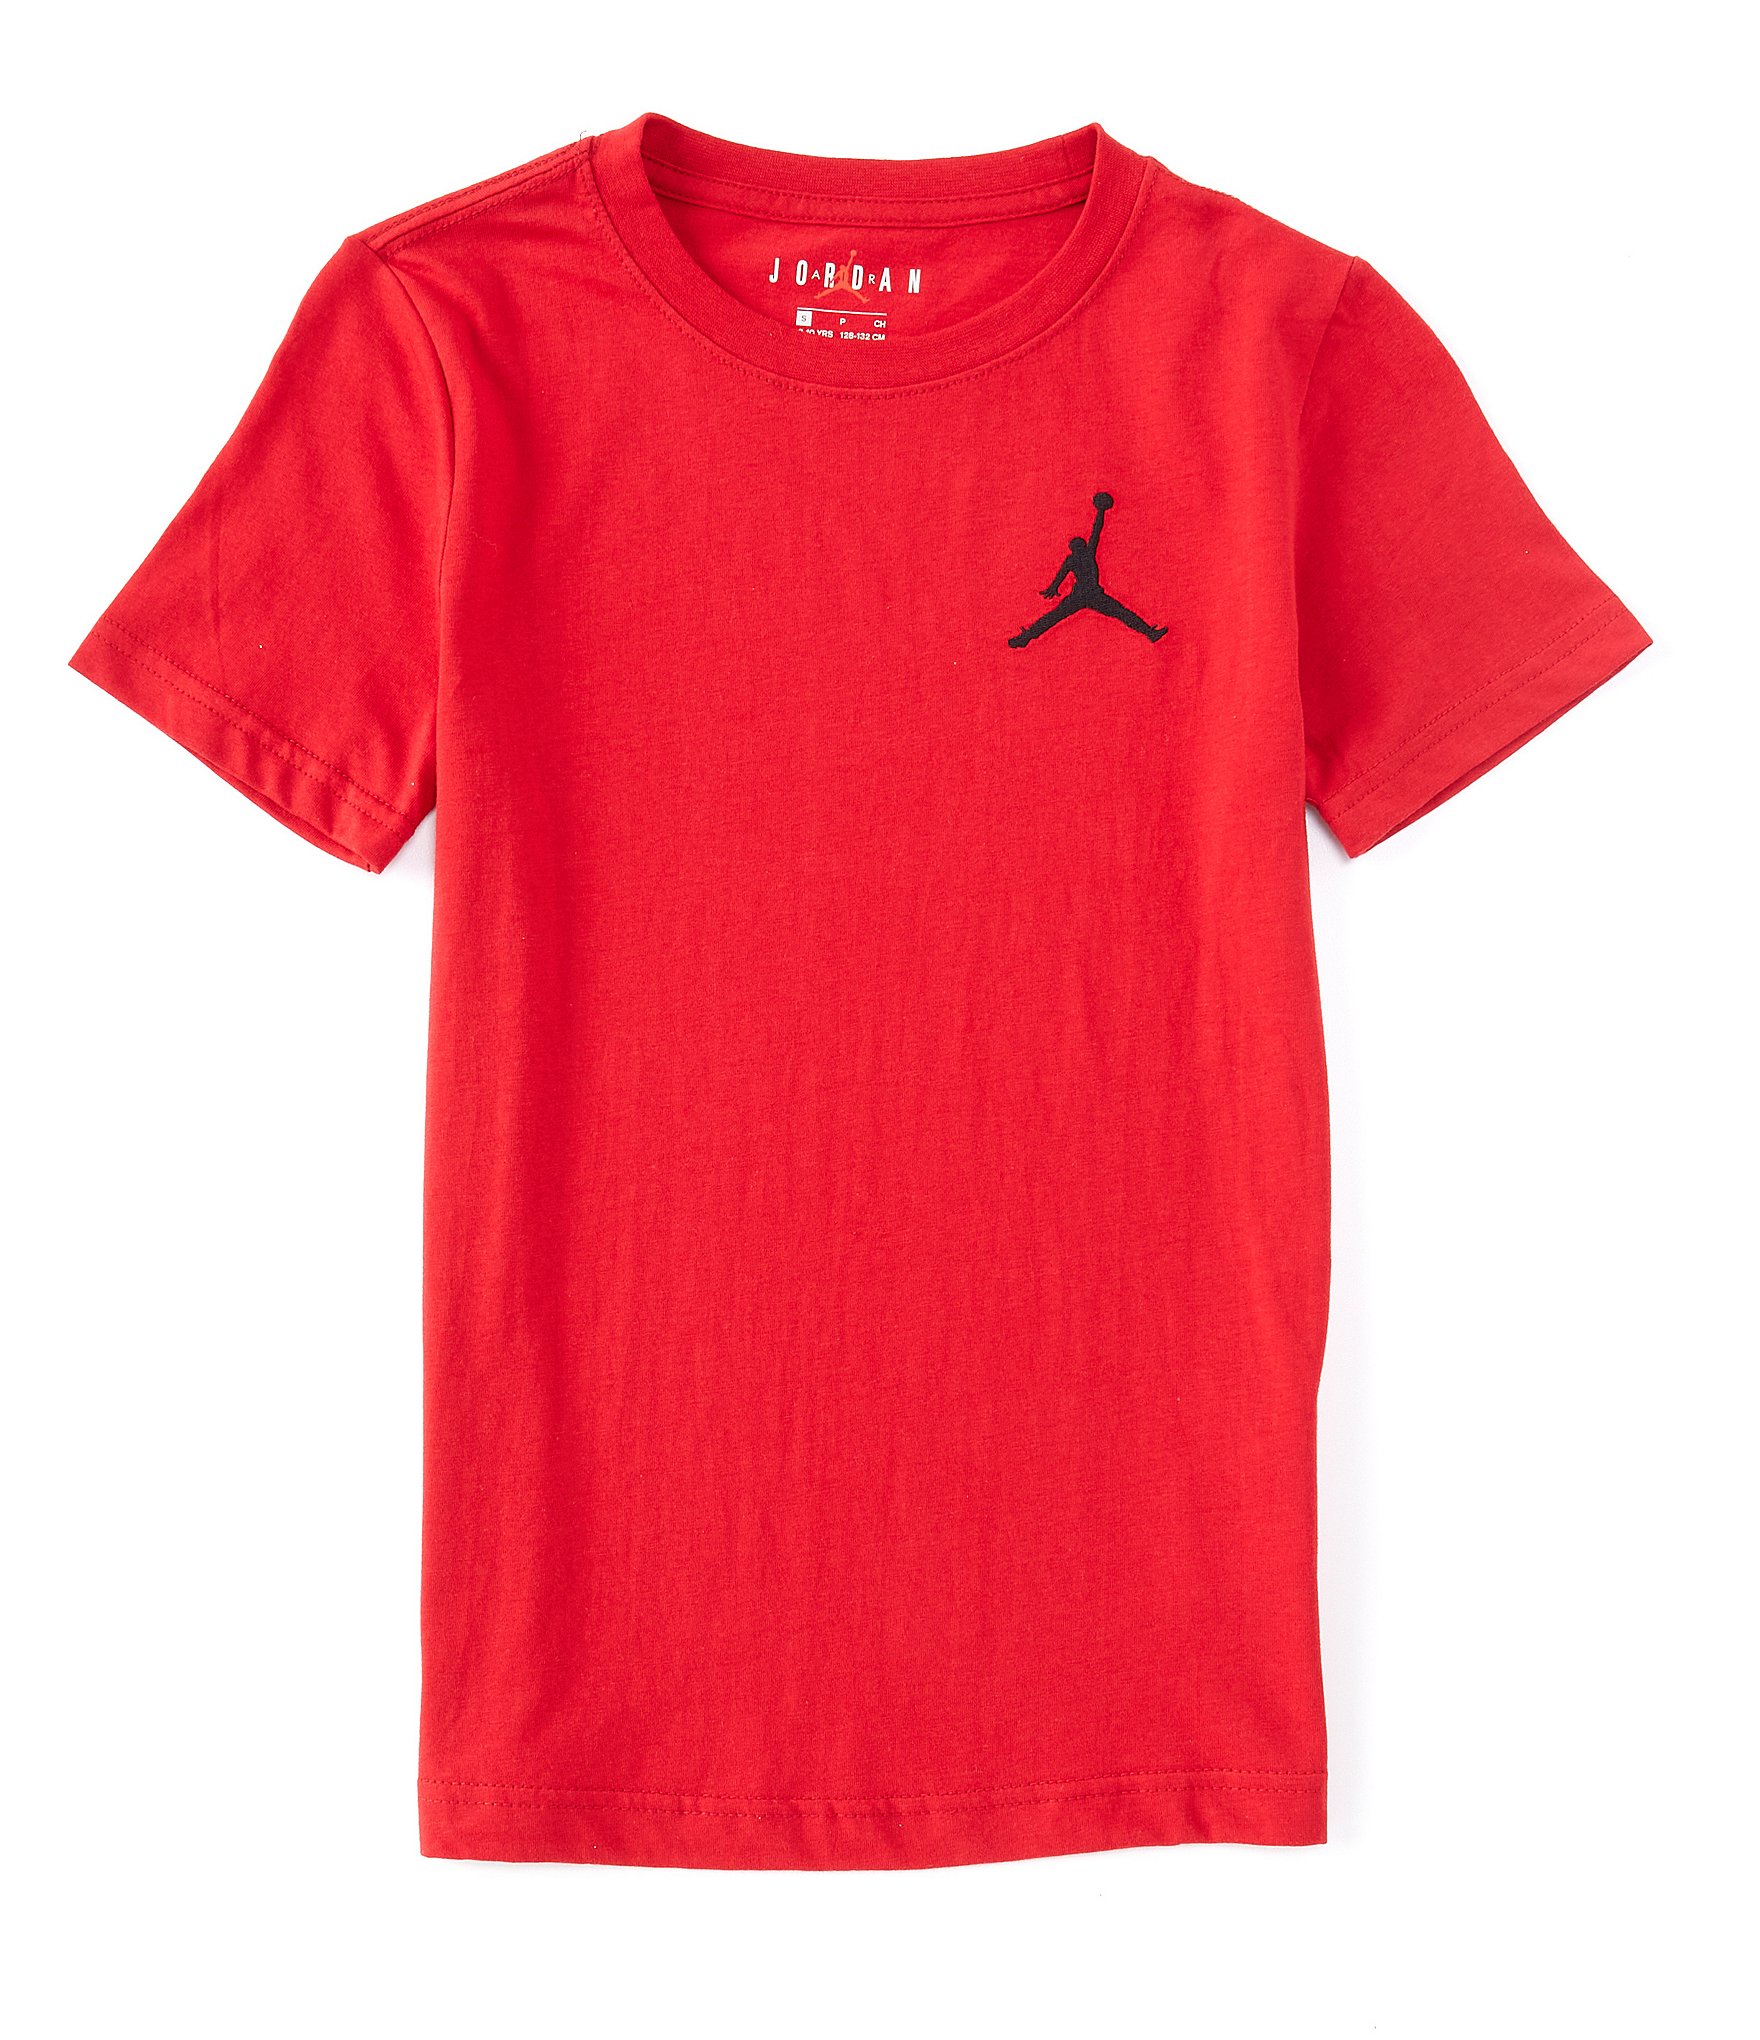  Jordan Blinds Long-Sleeve Boys Active Shirts & Tees Size M,  Color: Black/Red/White : Clothing, Shoes & Jewelry